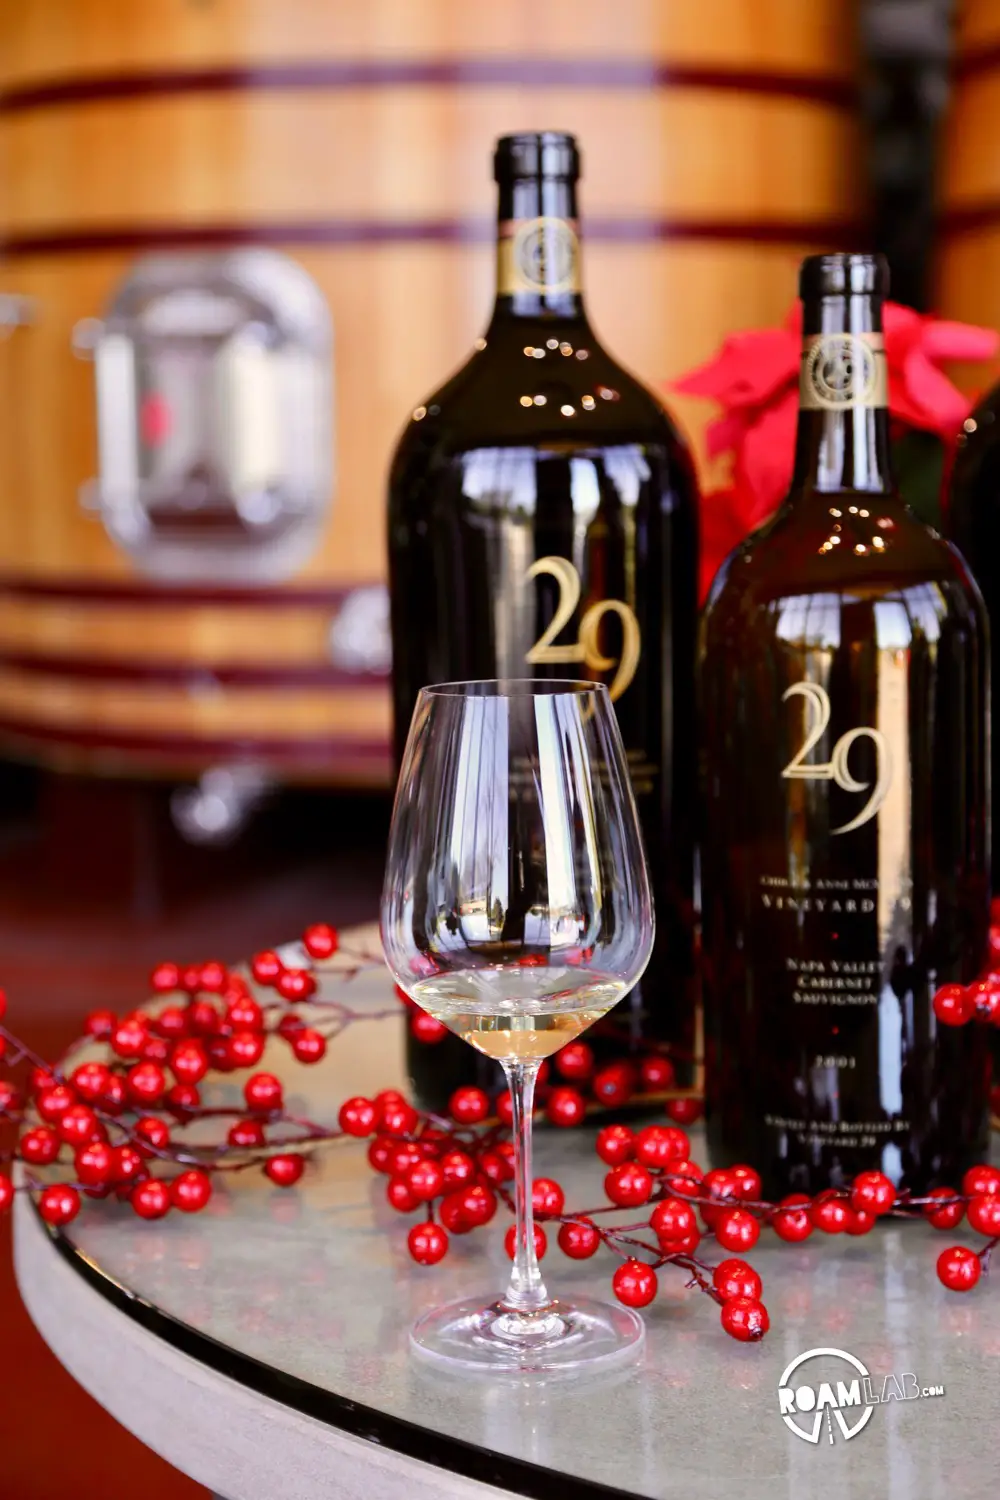 The consistently 90+ rated wines from Vineyard 29 are the product not only of prime location in Napa Valley but highly advanced technology.